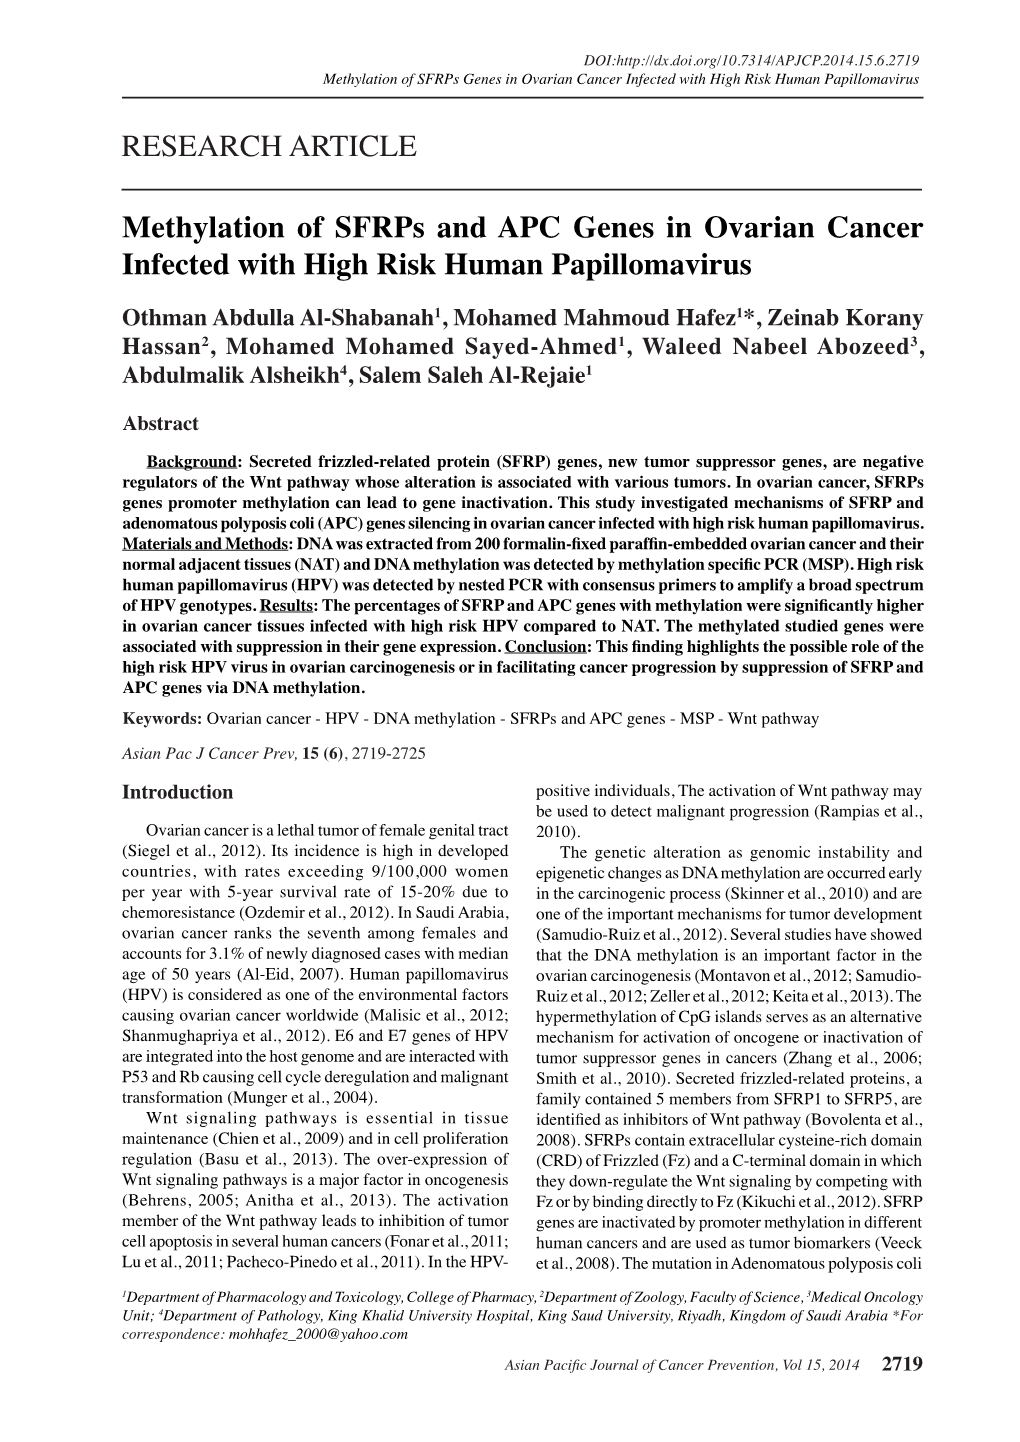 Methylation of Sfrps and APC Genes in Ovarian Cancer Infected with High Risk Human Papillomavirus